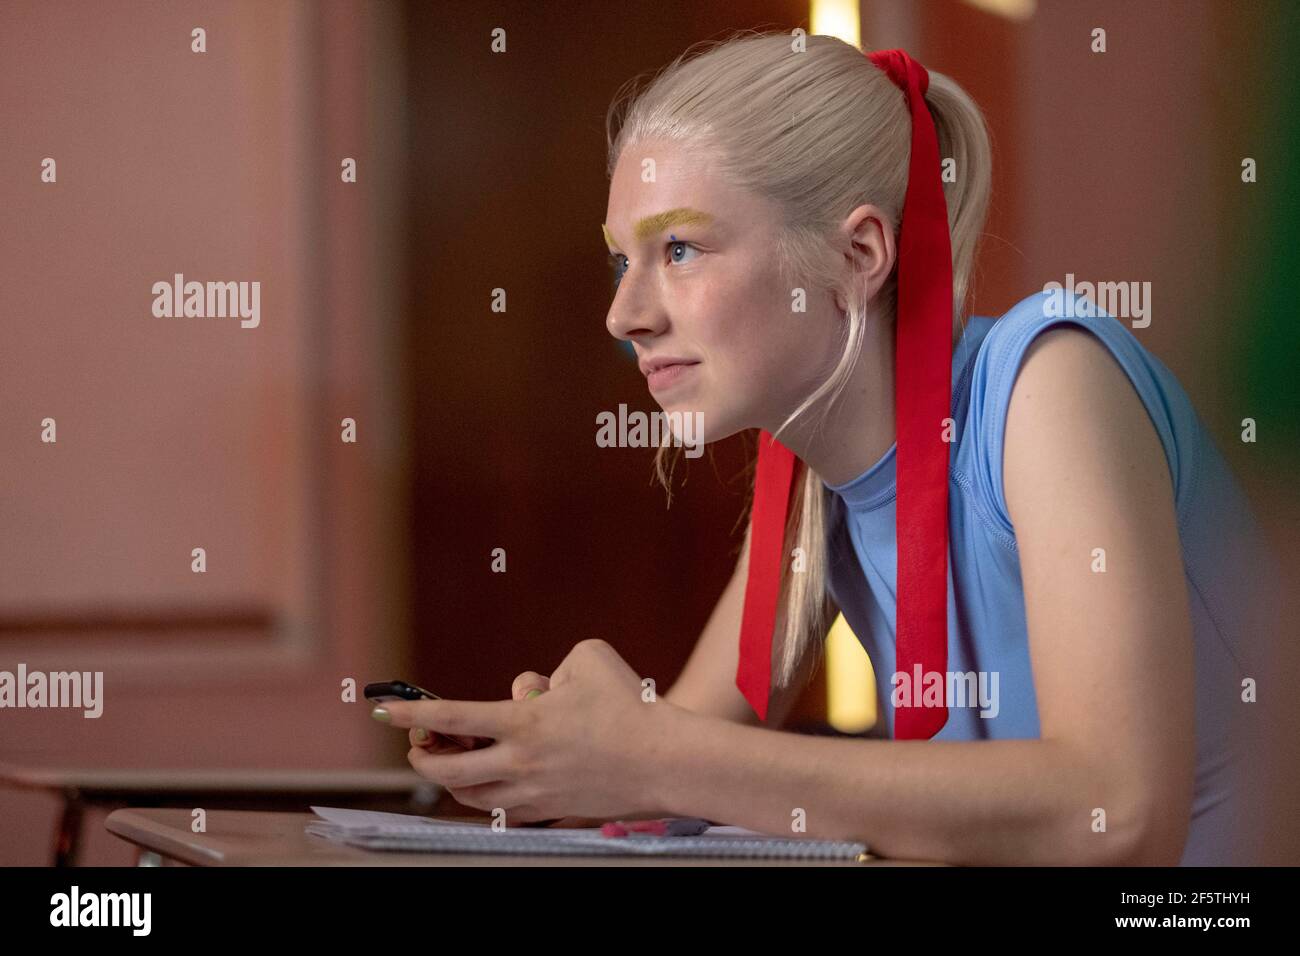 HUNTER SCHAFER in EUPHORIA (2019), directed by SAM LEVINSON. Credit: HOME BOX OFFICE (HBO) / Album Stock Photo